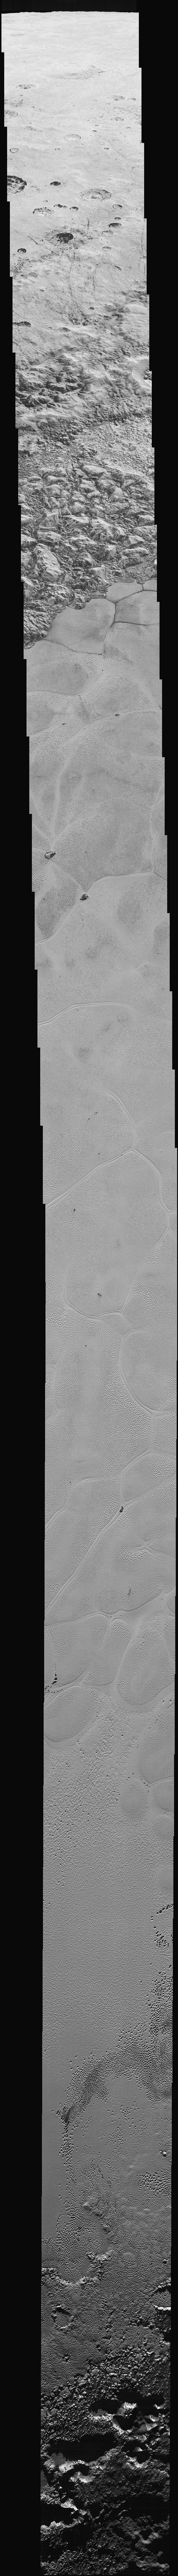 Giant, full-resolution mosaic of a strip of Pluto from New Horizons. Image credit: Image credit: NASA/JHUAPL/SwRI.